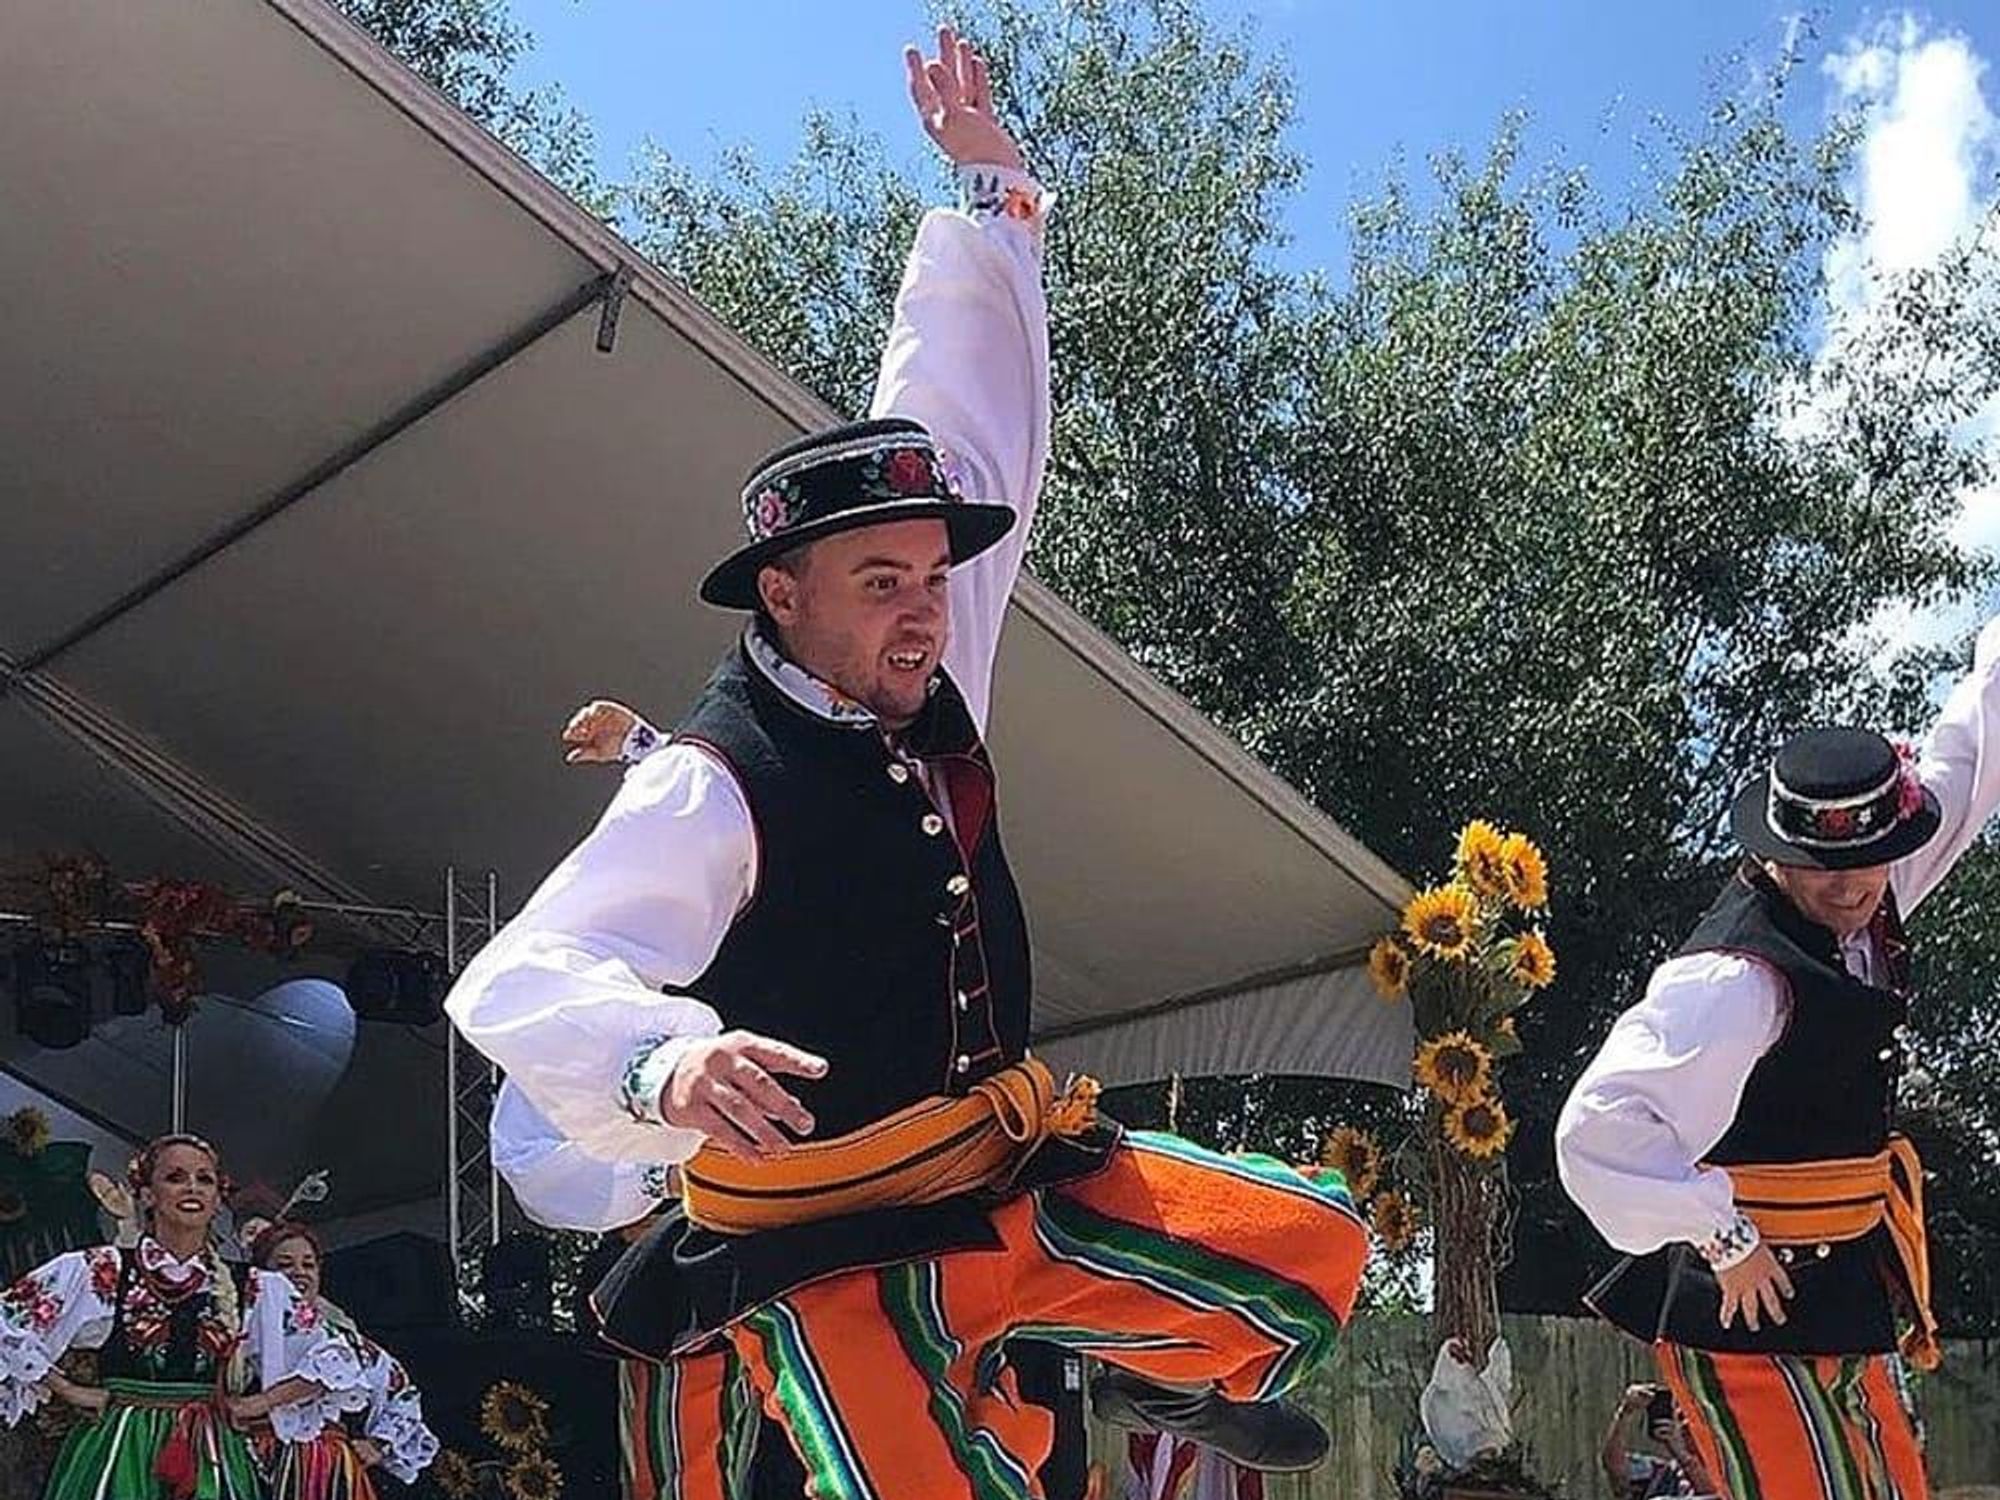 Houston's Polish Festival returns with polkadotted weekend of food